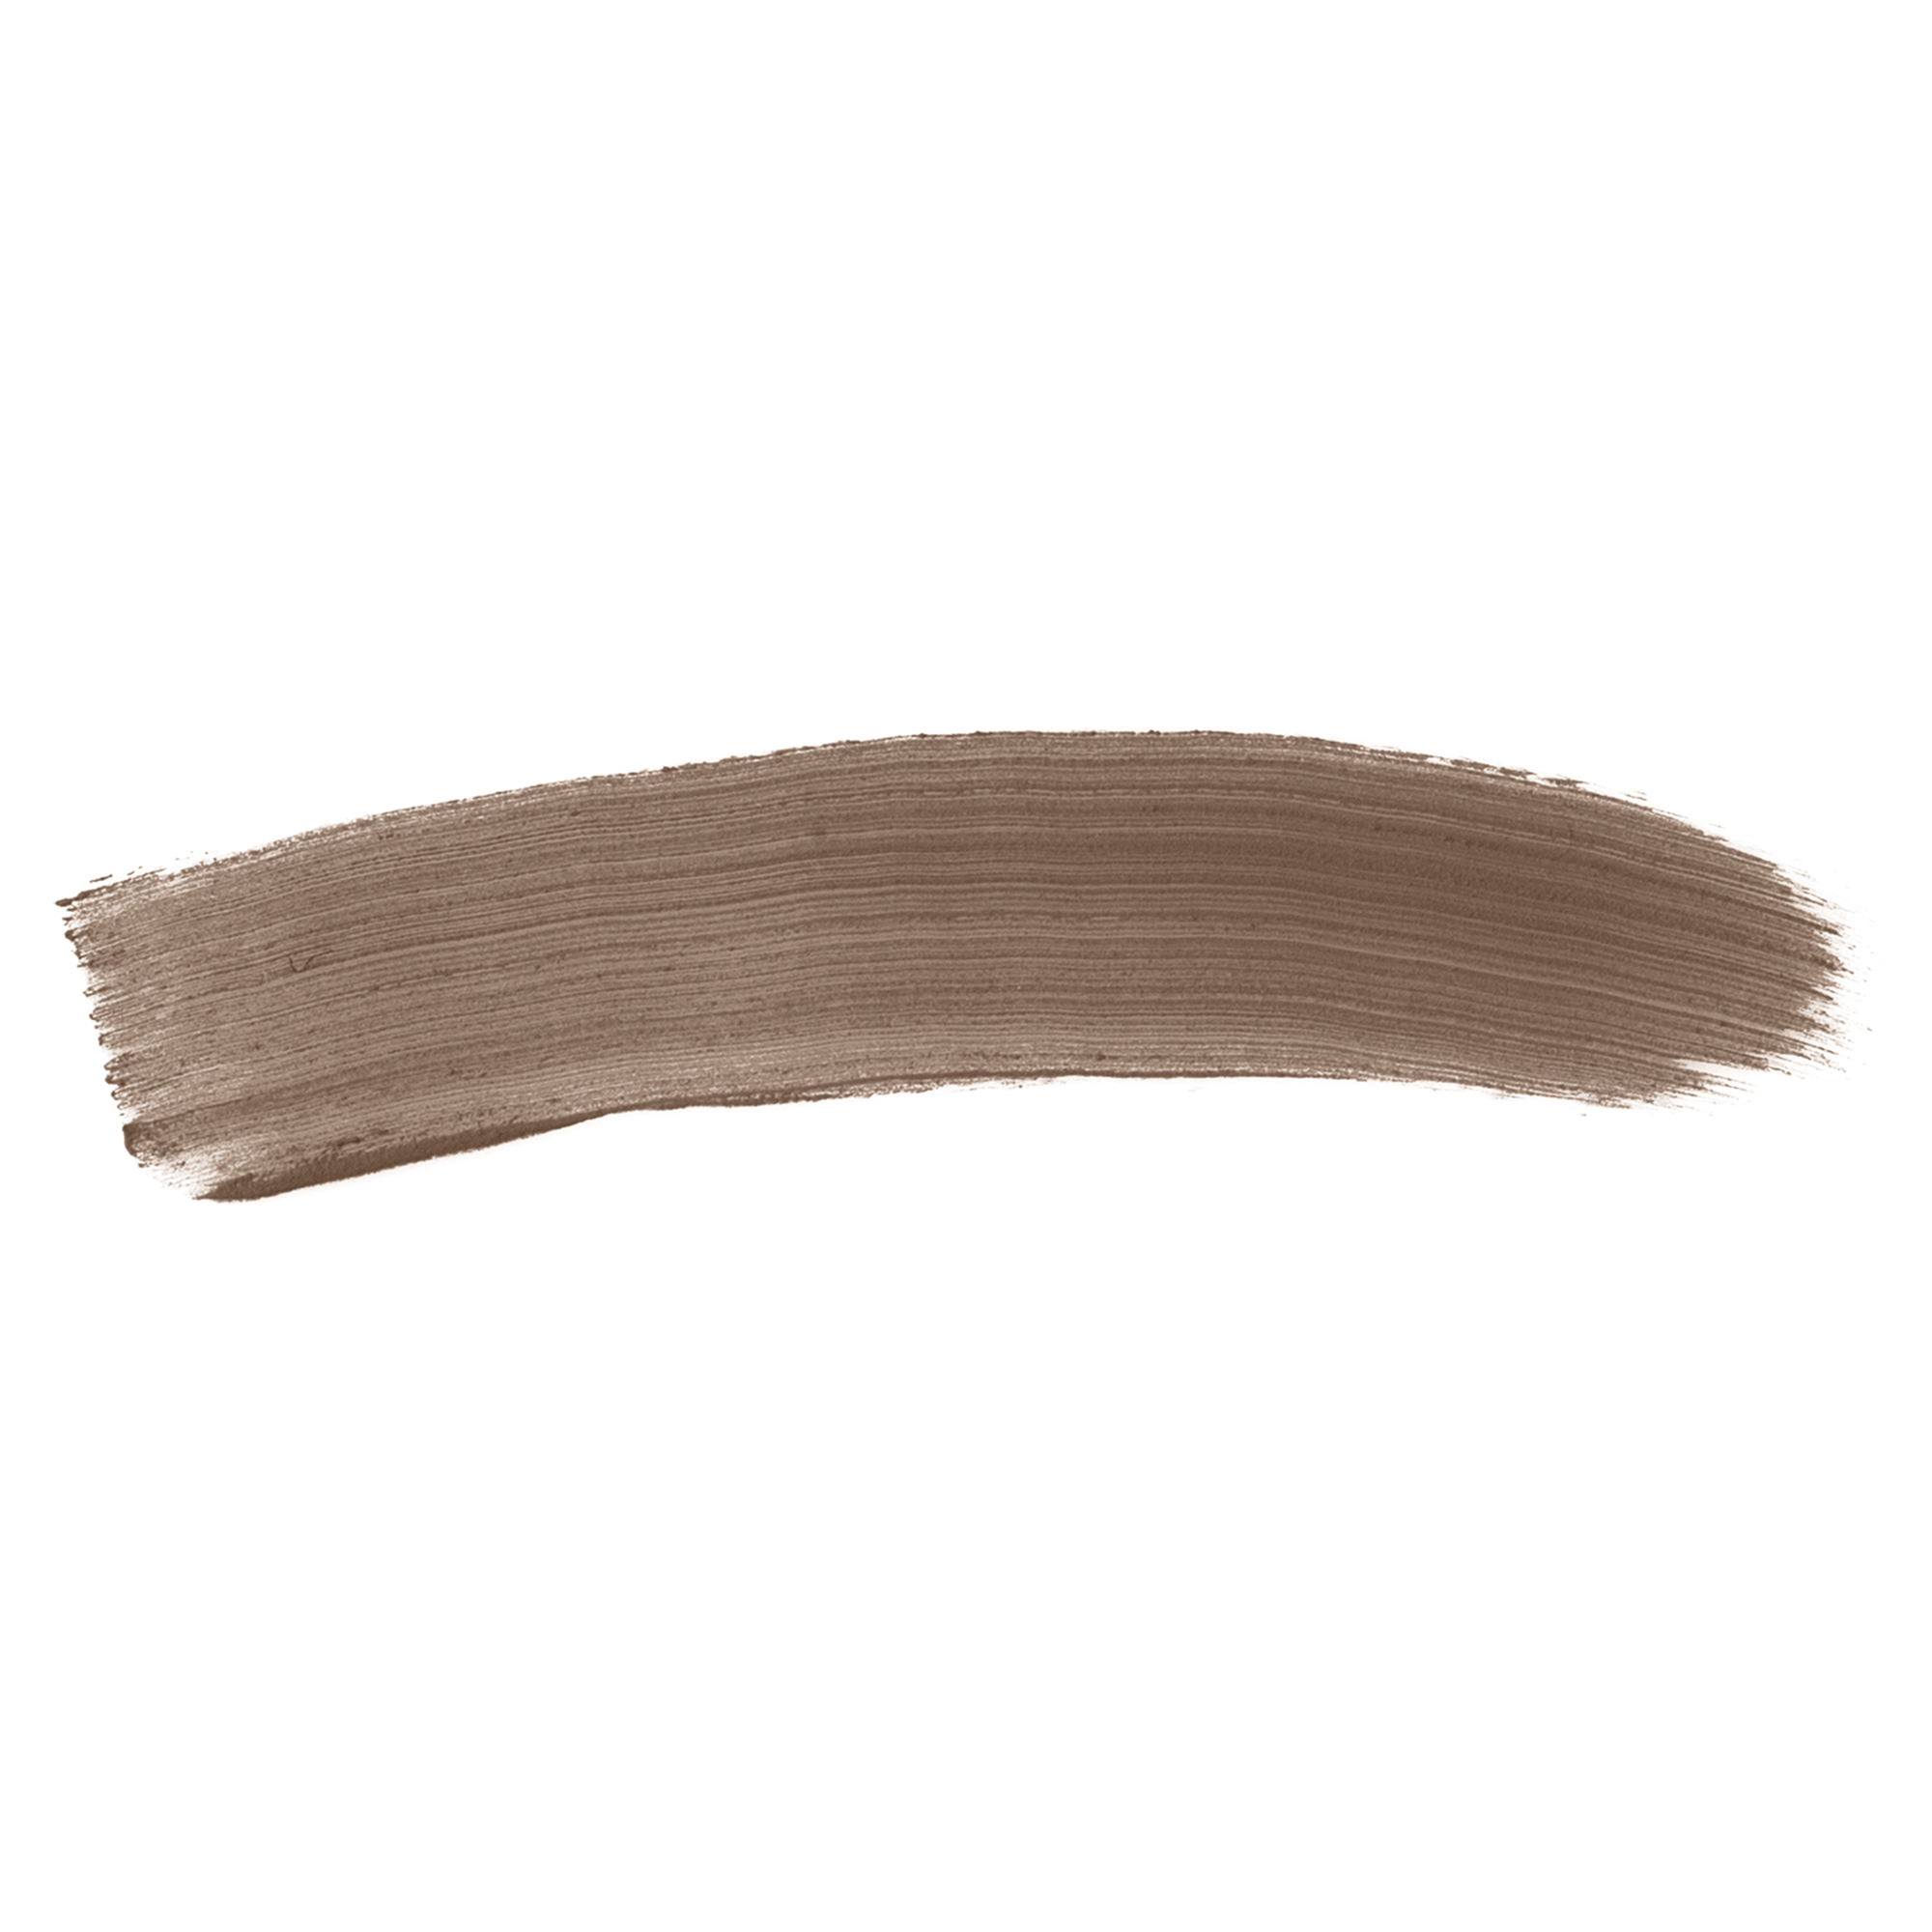 Benefit Cosmetics POWmade Brow Pomade - In 3.5 Neutral Medium Brown, Size: Full Size